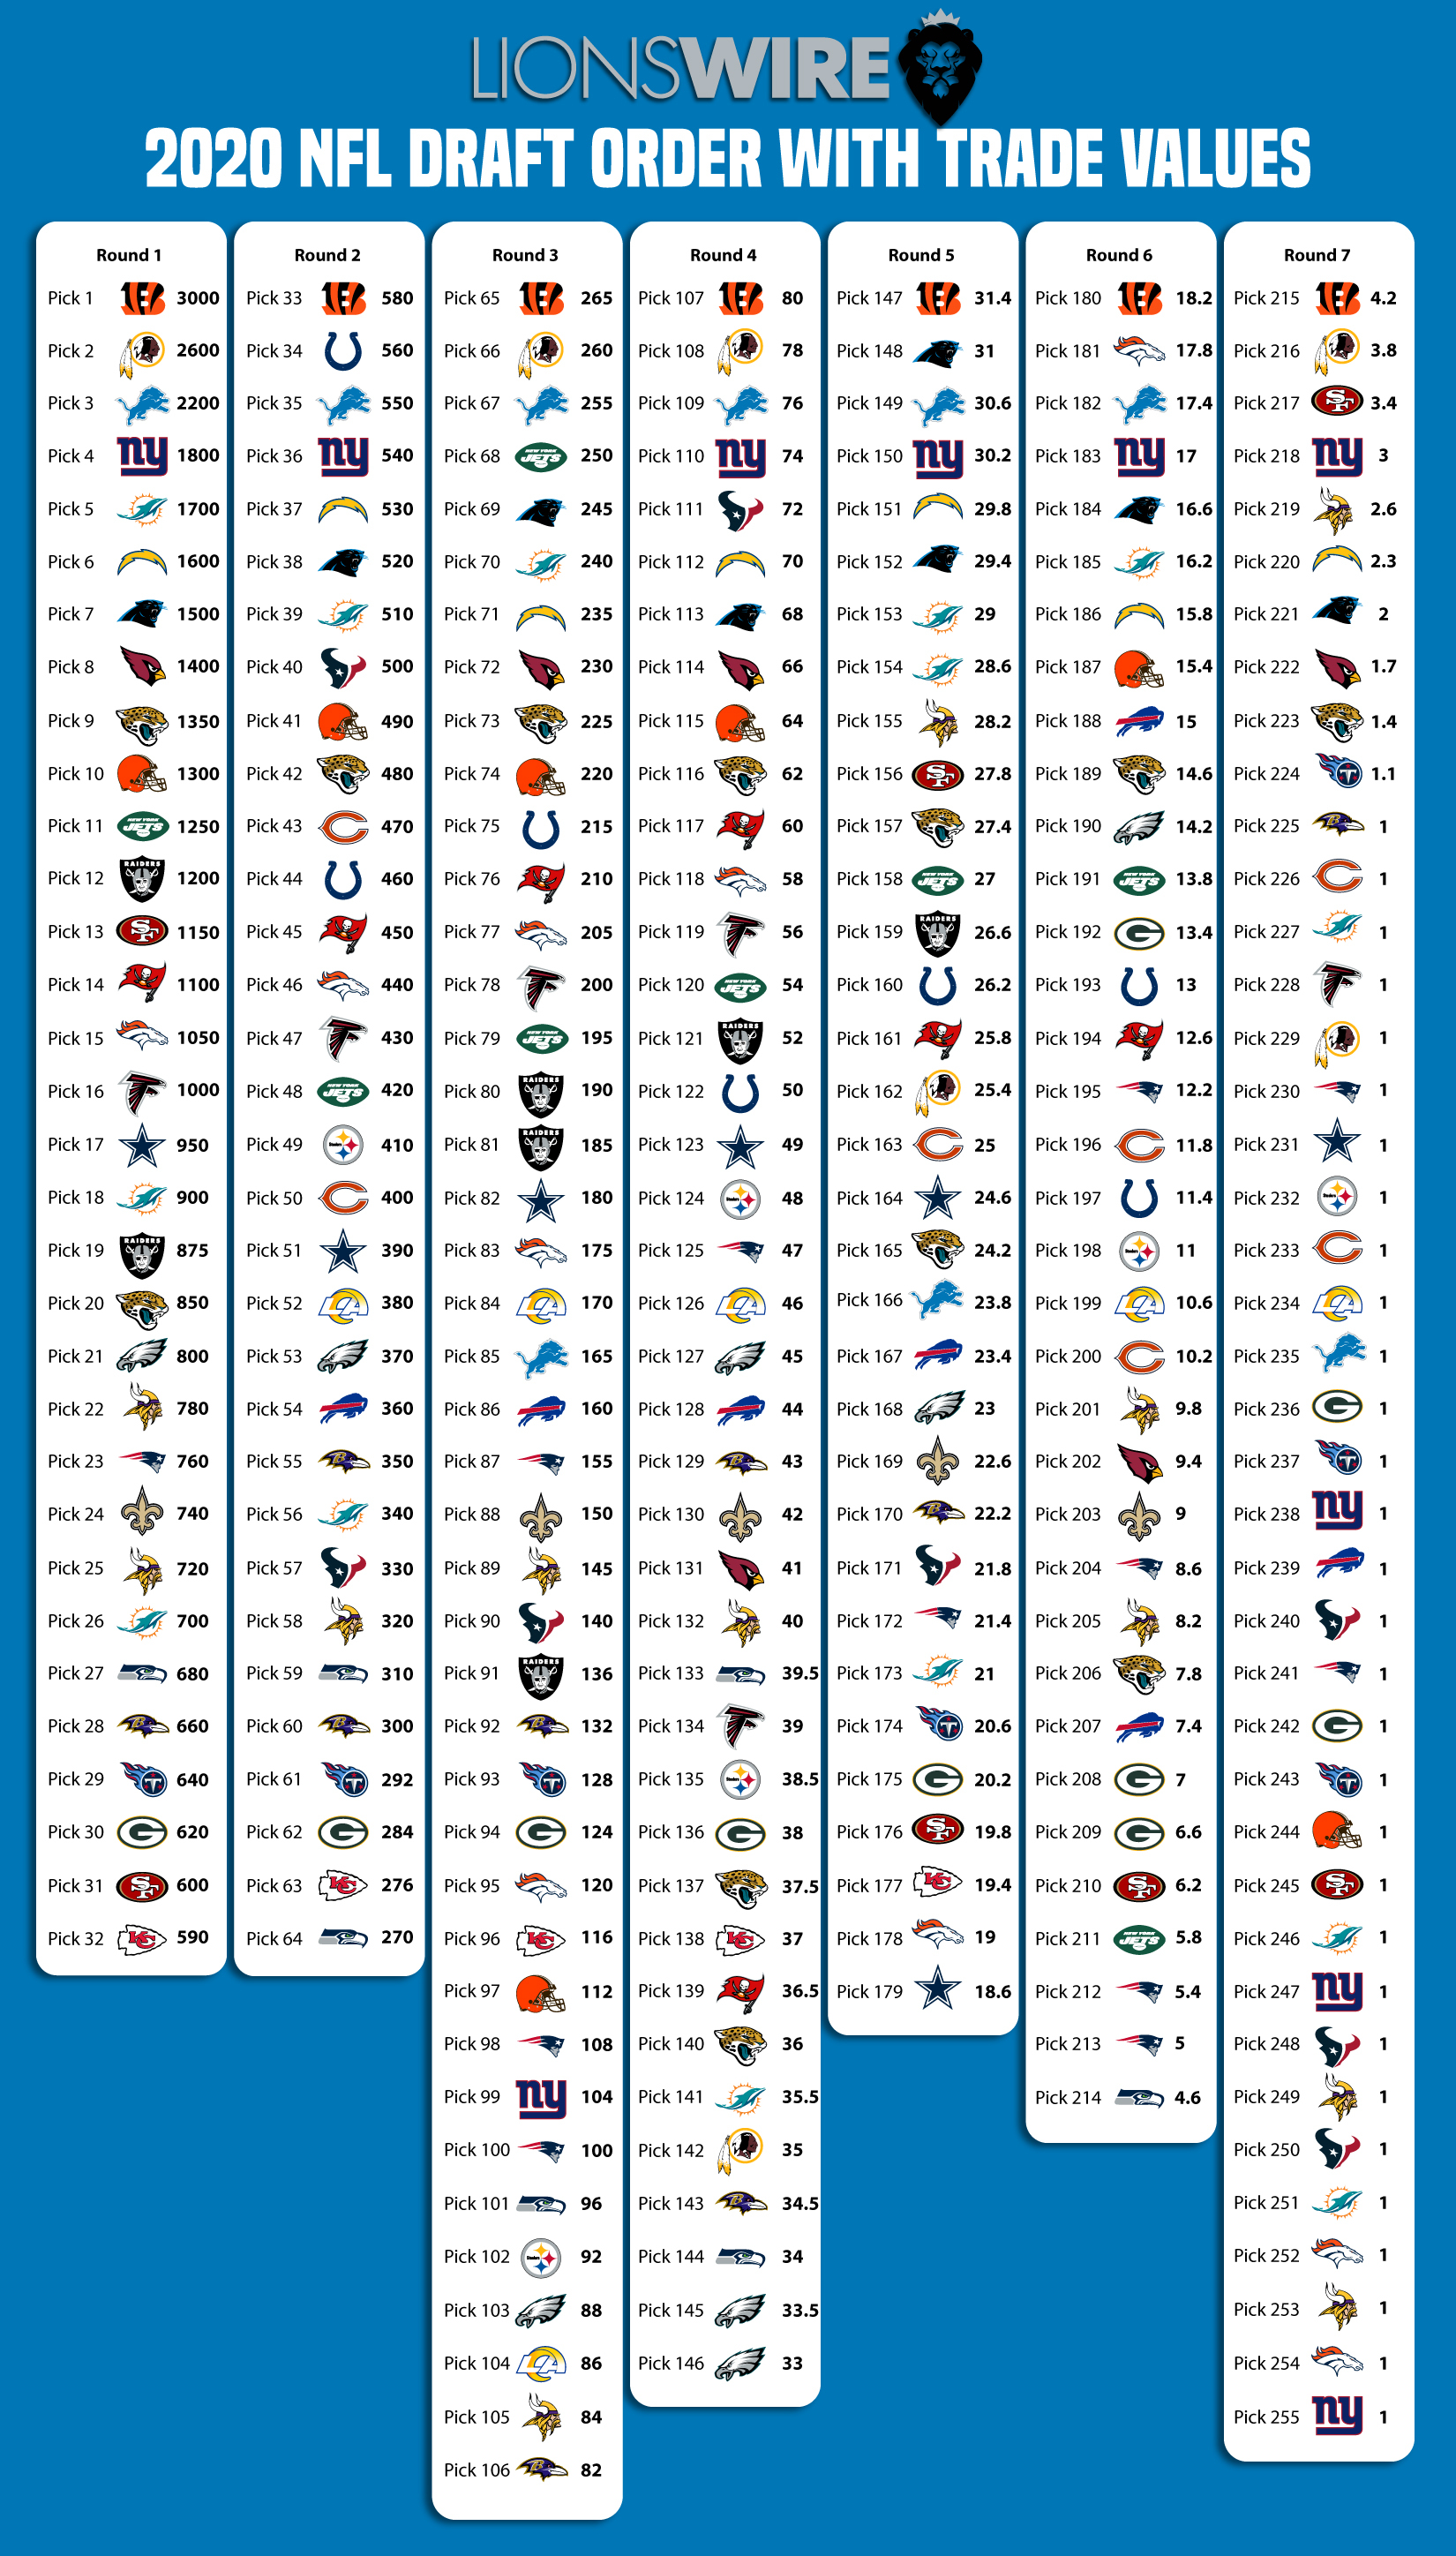 2020 NFL Draft Final 7round pick order with Lions trade values